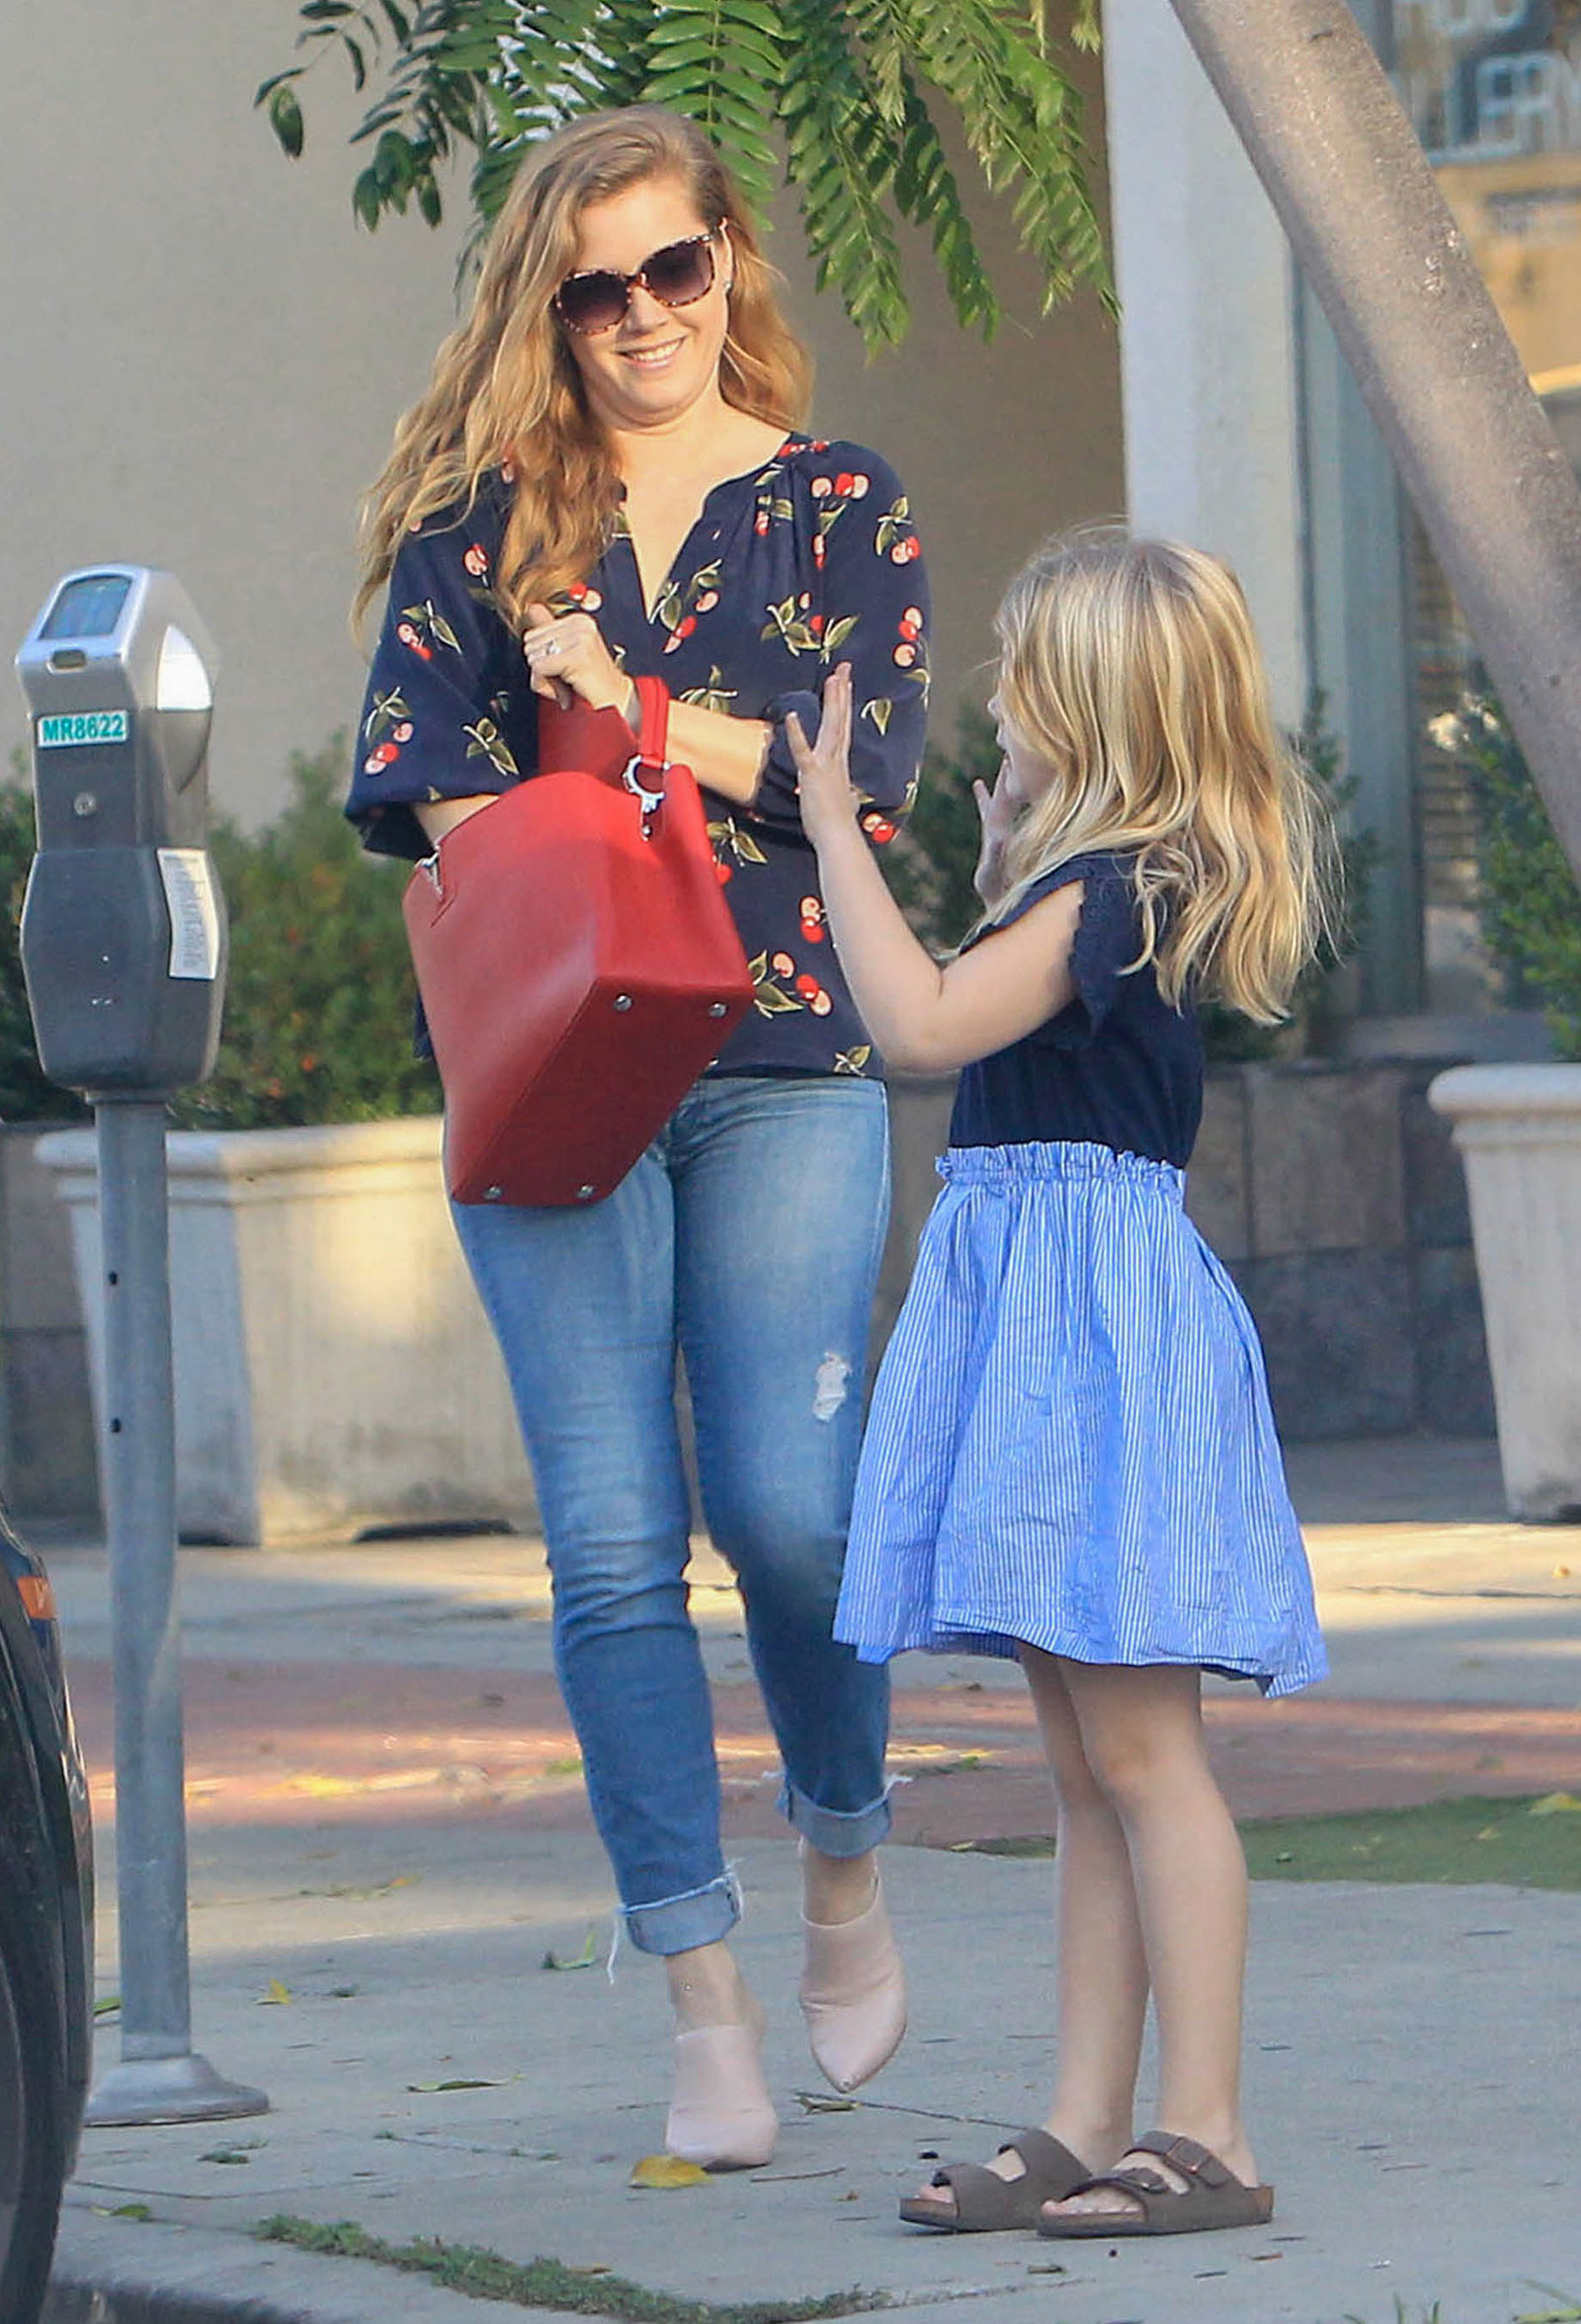 Amy Adams' wears a Joie cherry print blouse with jeans and nude mule heels.